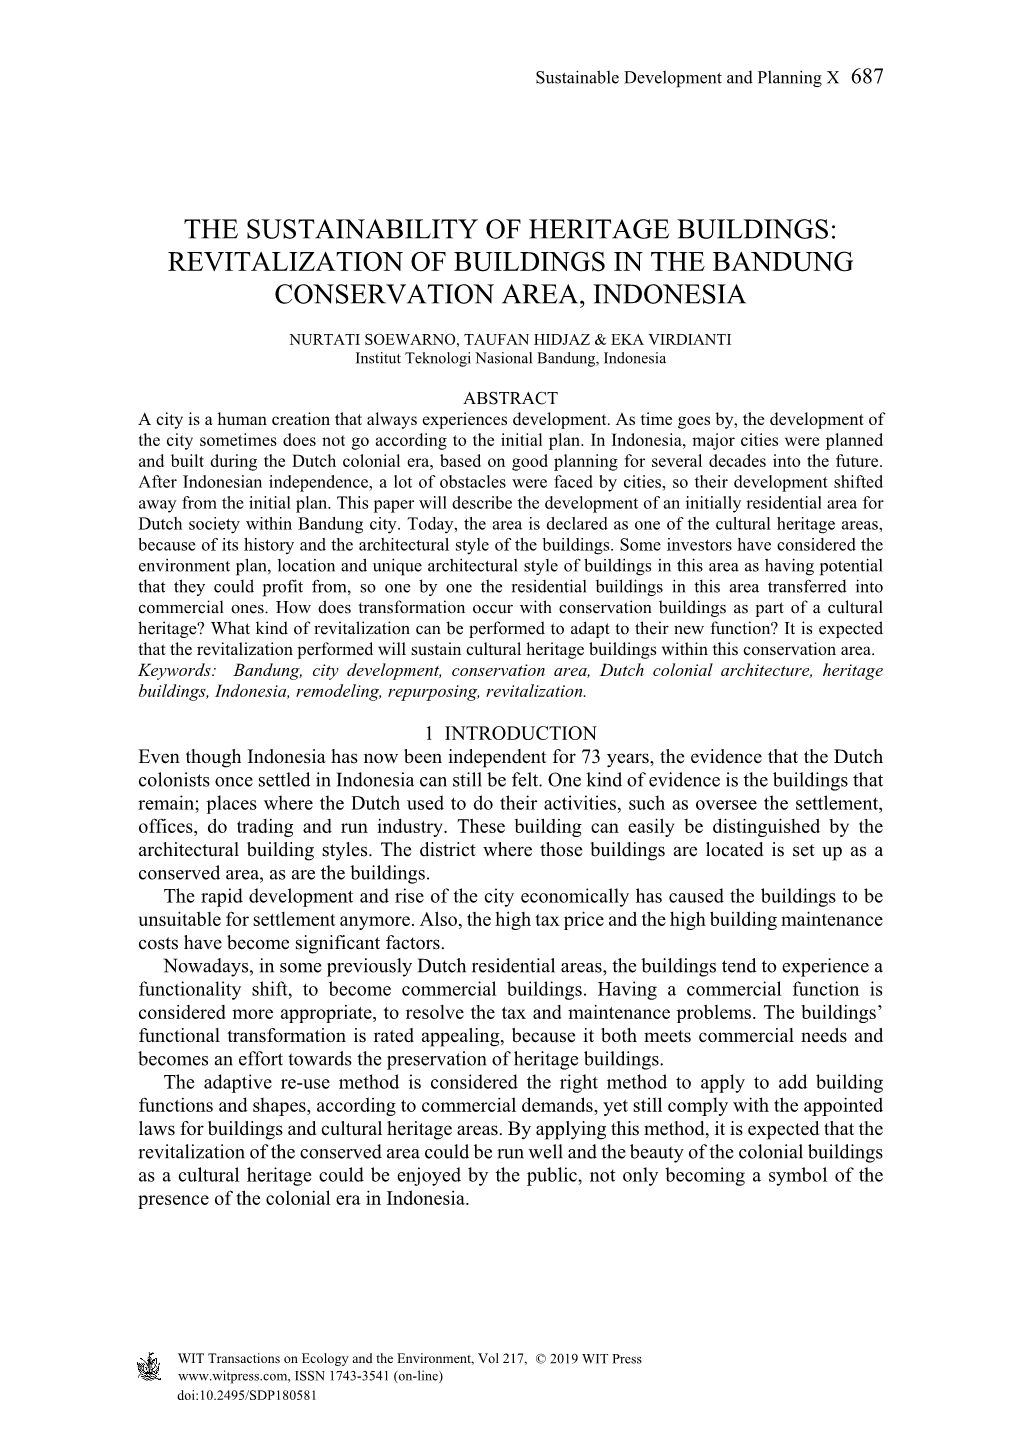 The Sustainability of Heritage Buildings: Revitalization of Buildings in the Bandung Conservation Area, Indonesia